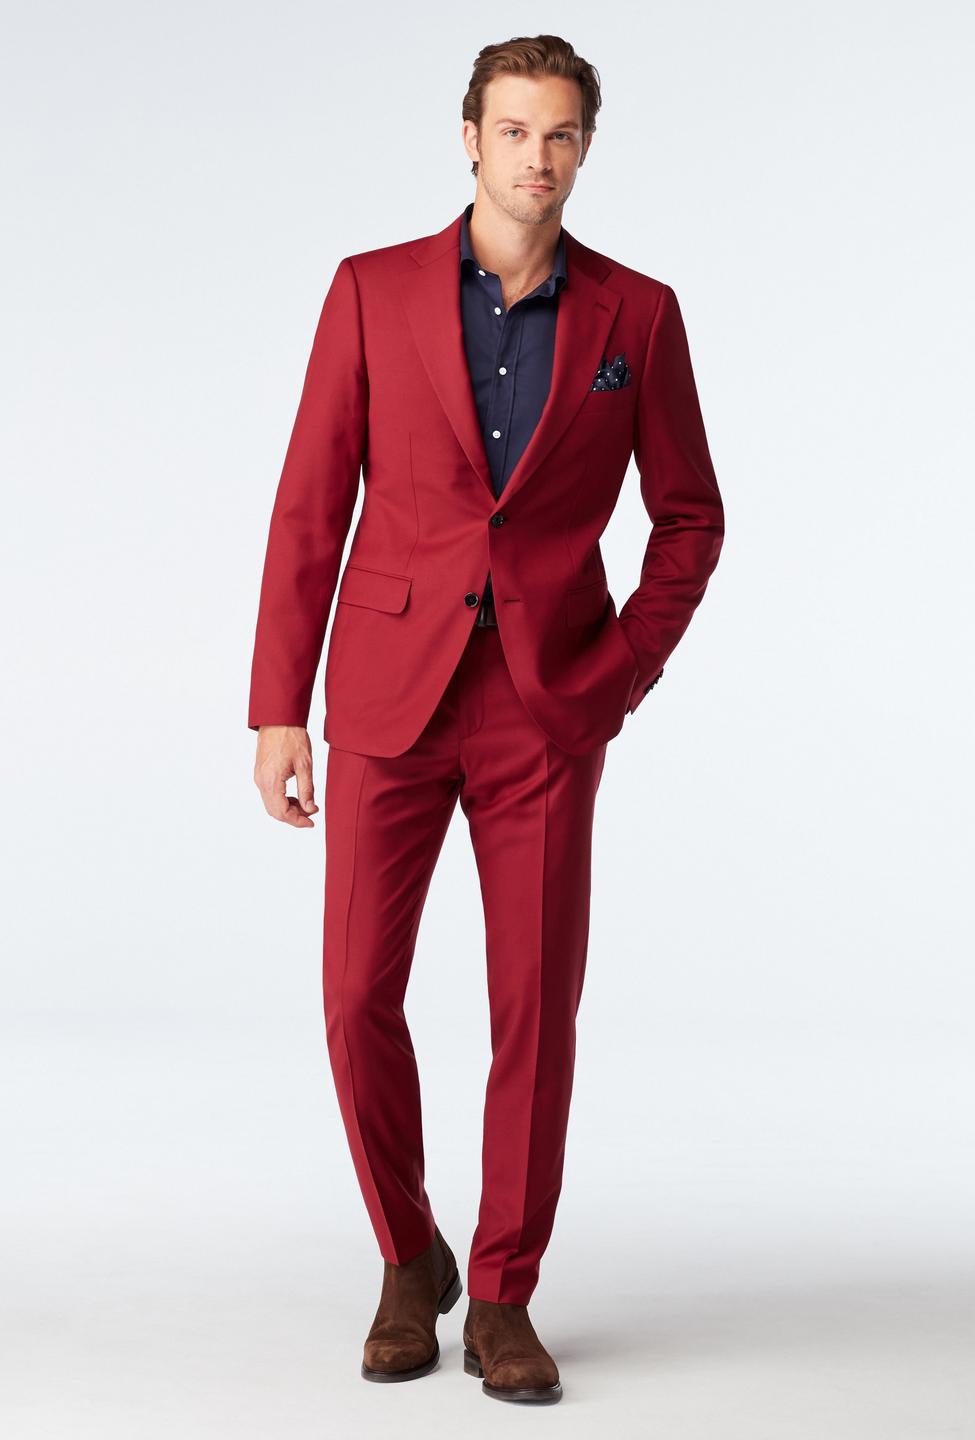 Red suit - Hemsworth Solid Design from Premium Indochino Collection